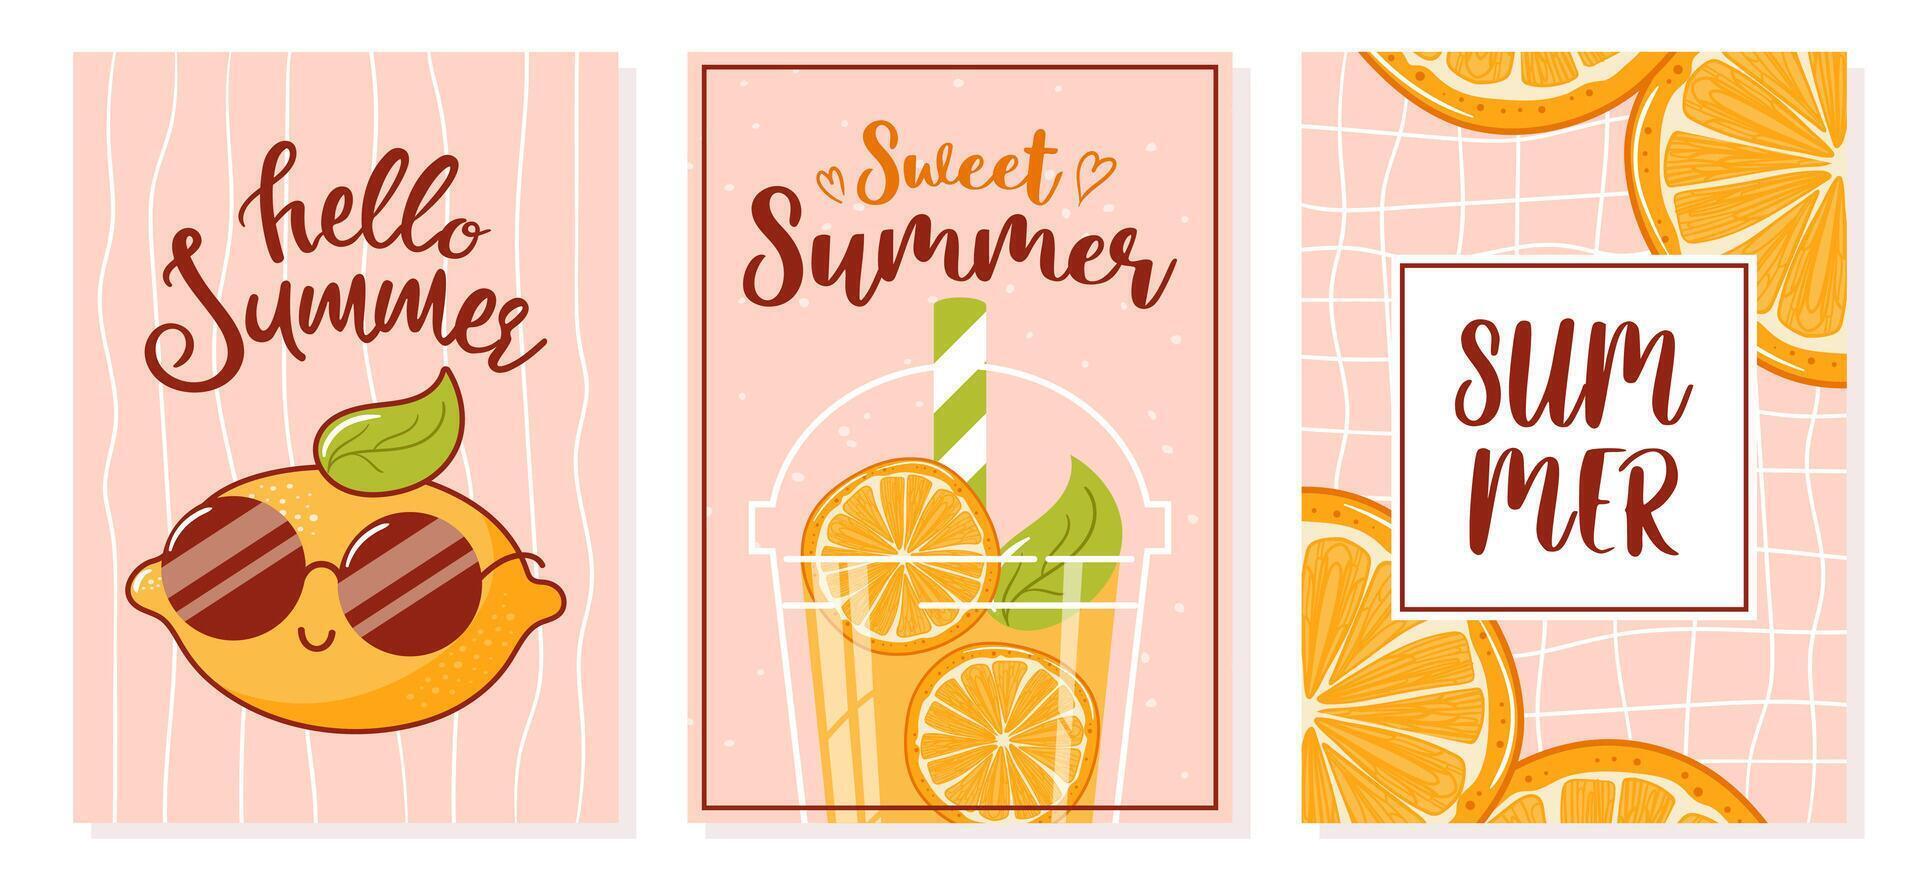 Hello summer. Set of postcards, banners for sale. Cool lemons in sunglasses, a cute retro cartoon character. Orange fresh. Groovy, vintage. Trendy old style. 1970s Tropical exotic fruits vector